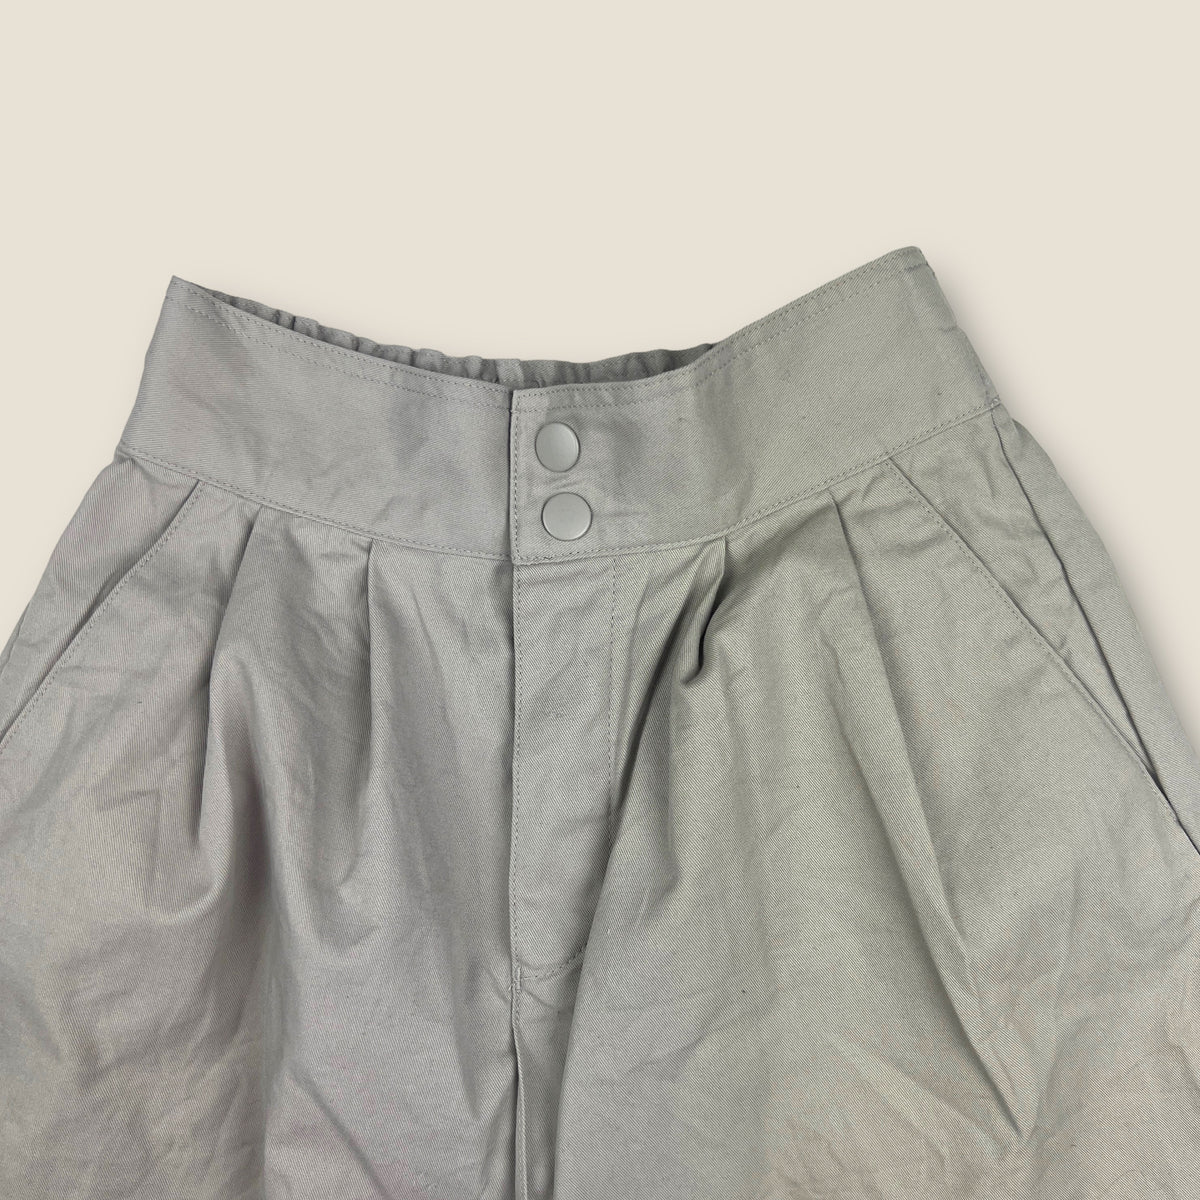 Cos Cullotte in Grey size 5-6 years